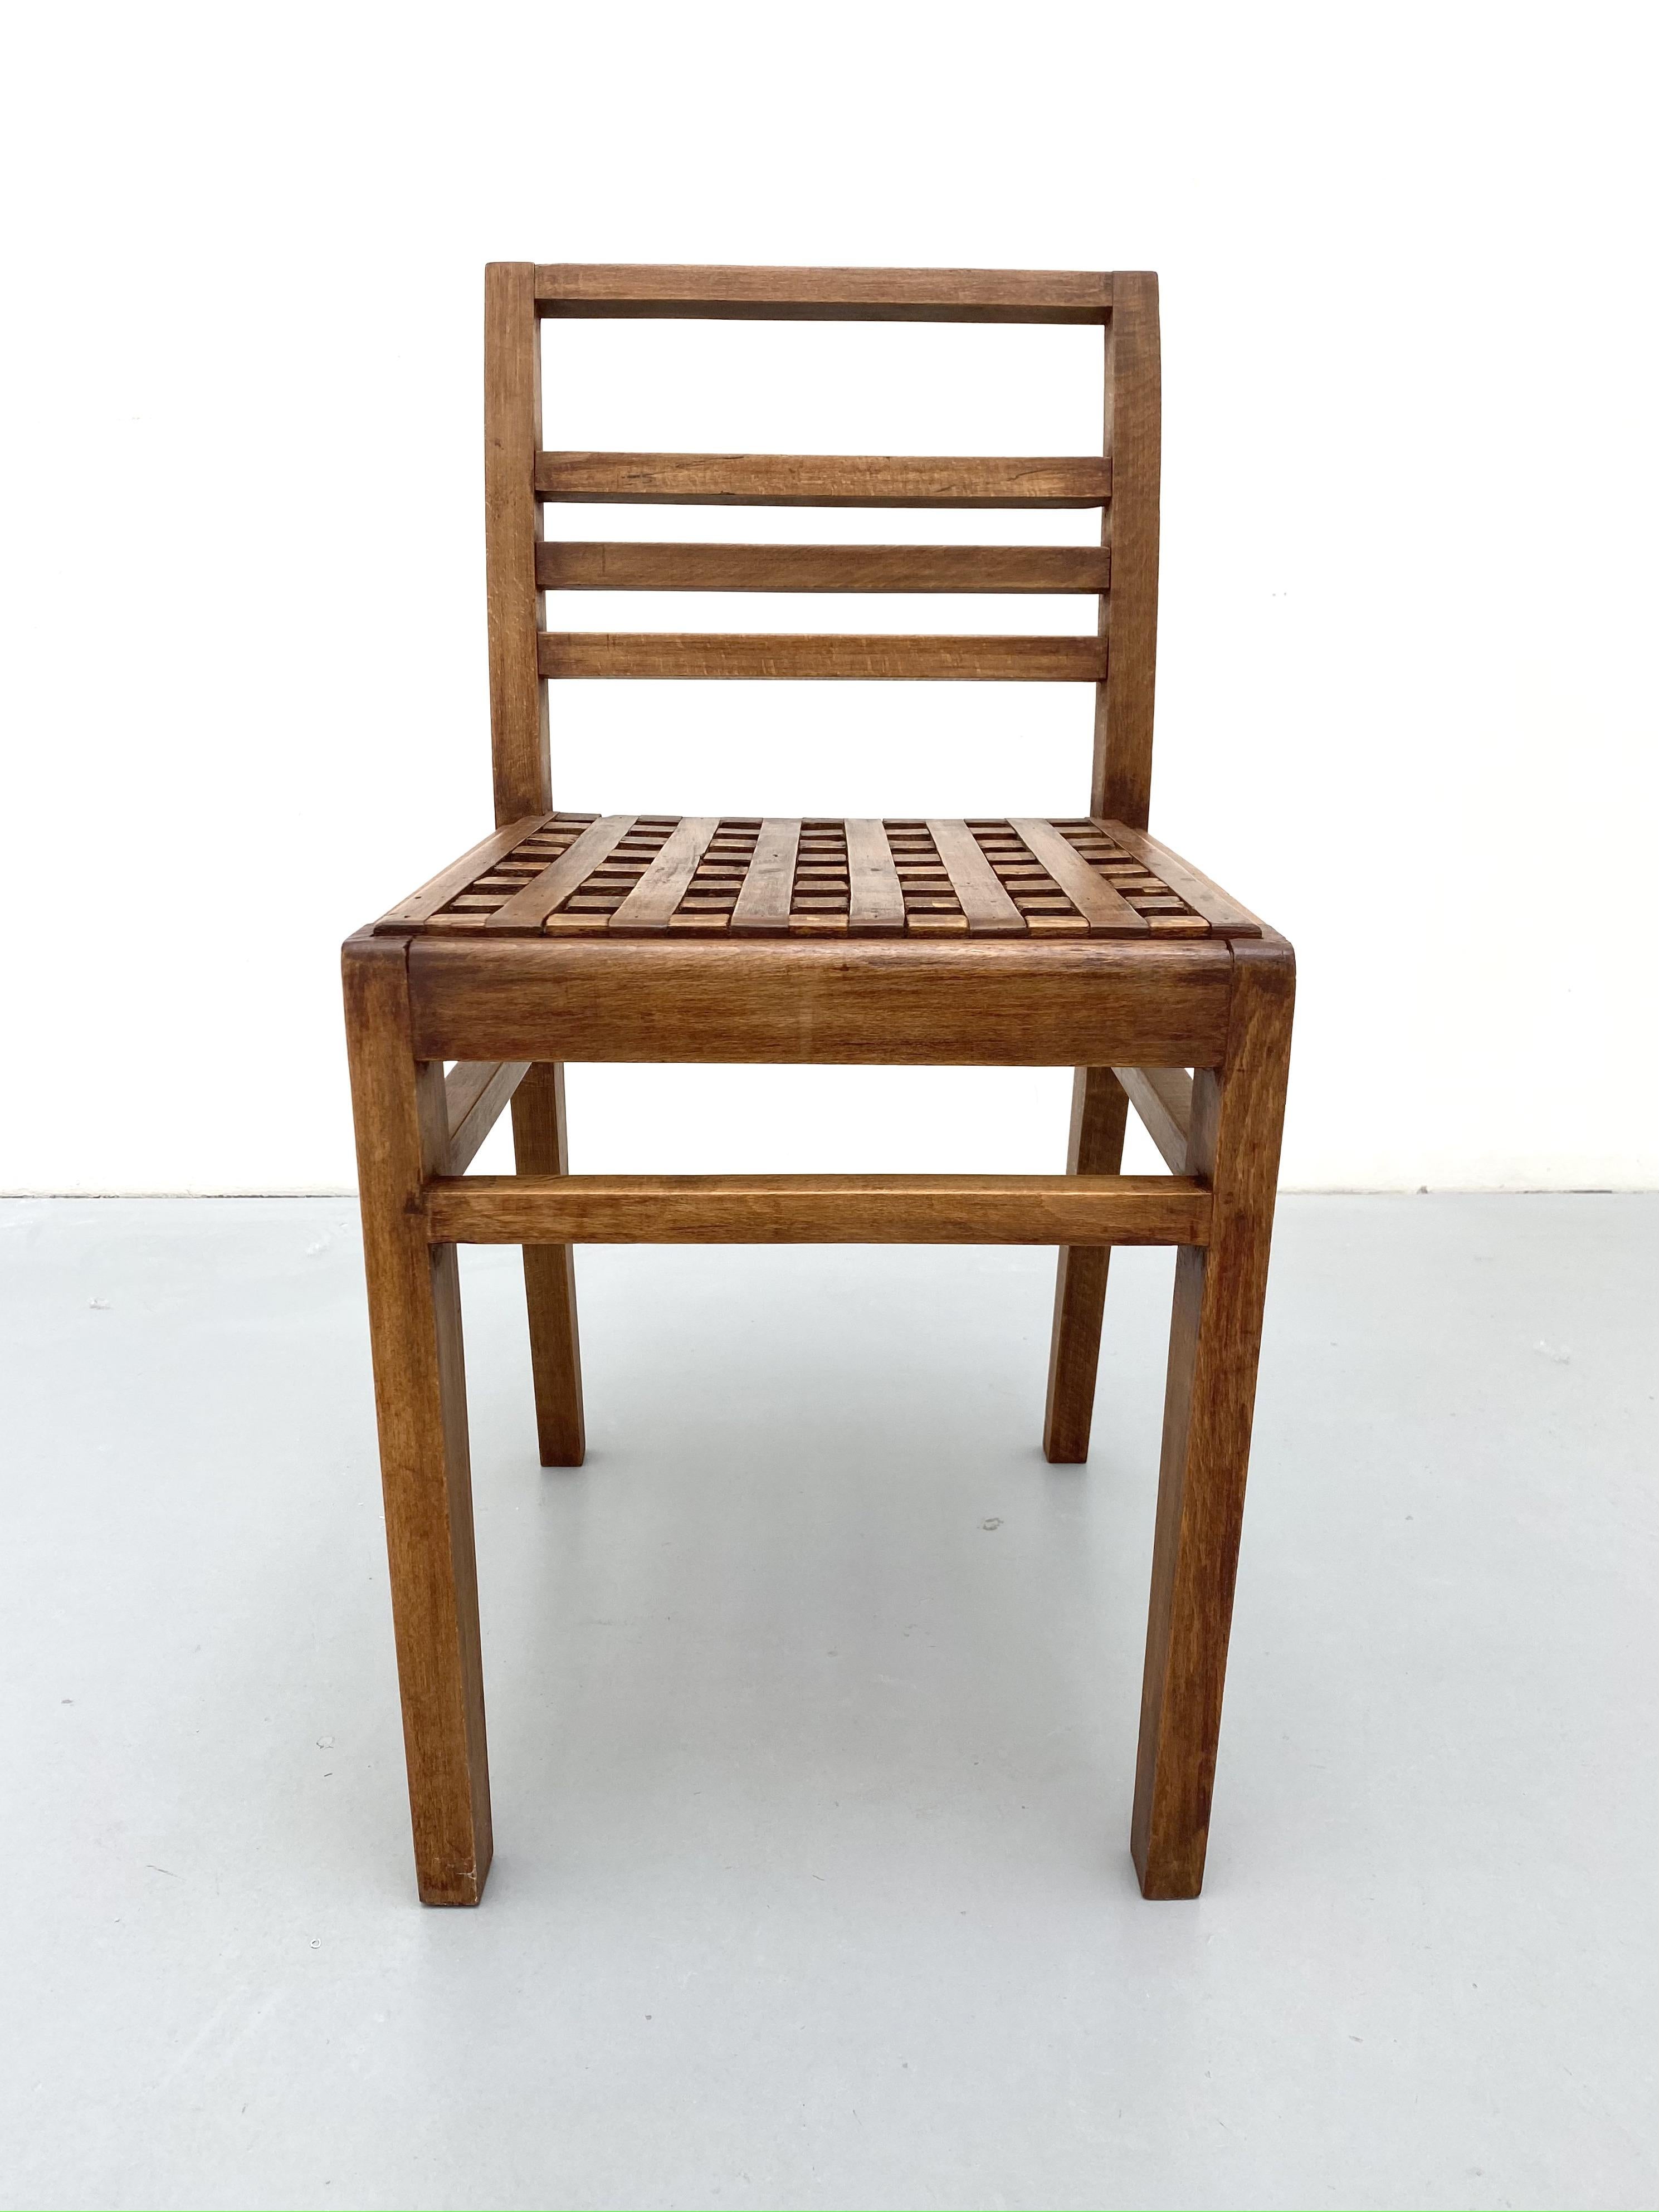 Oak duckboard chair model 103 by René Gabriel, 1941

Chair by René Gabriel designed in 1941 for the provisional construction department. This was the first emergency furniture for victims of the Second World War bombings. This chair is part of